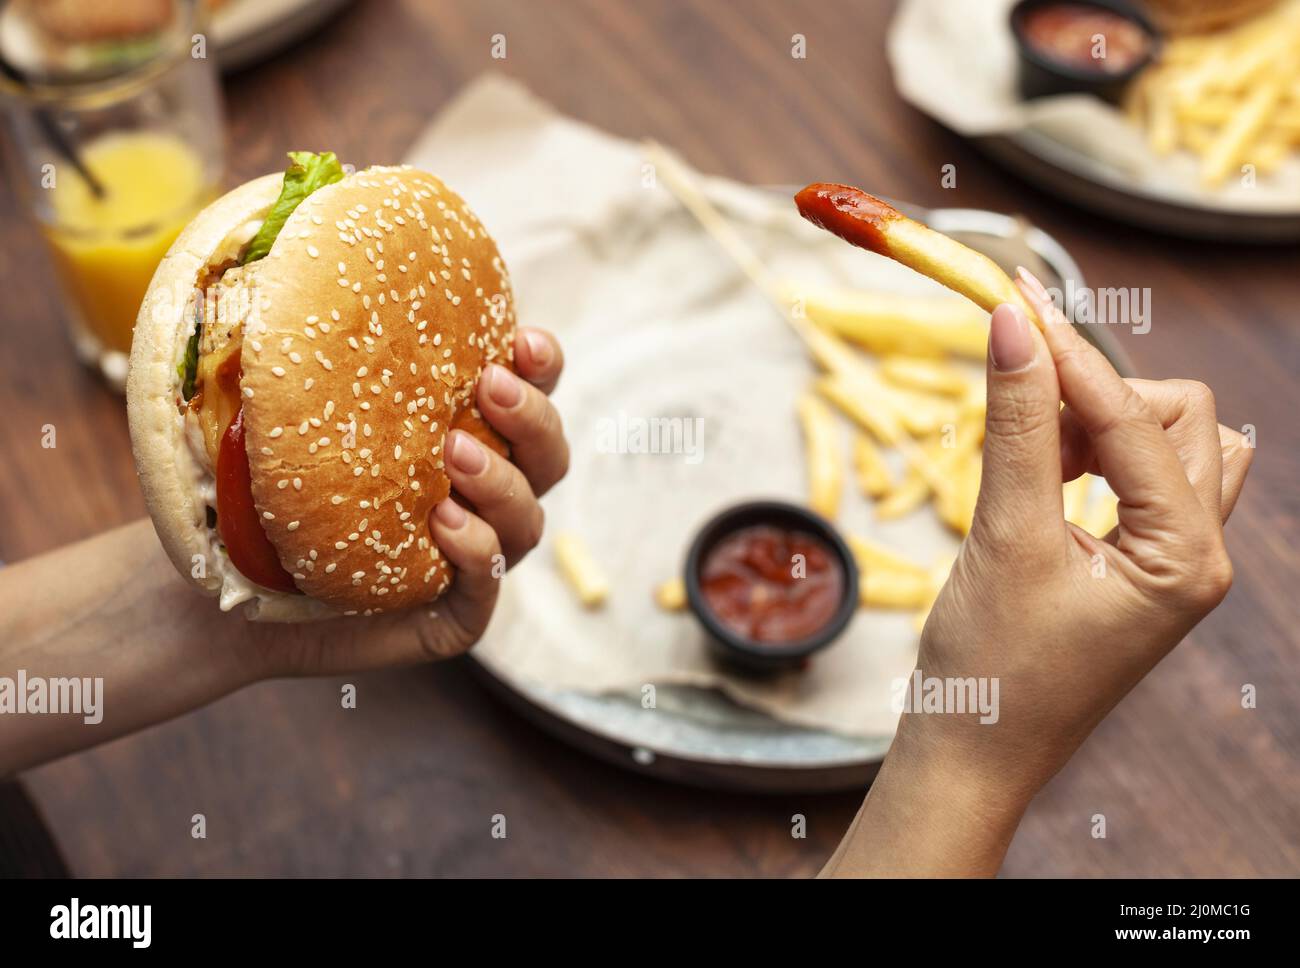 High angle person eating burger french fries Stock Photo